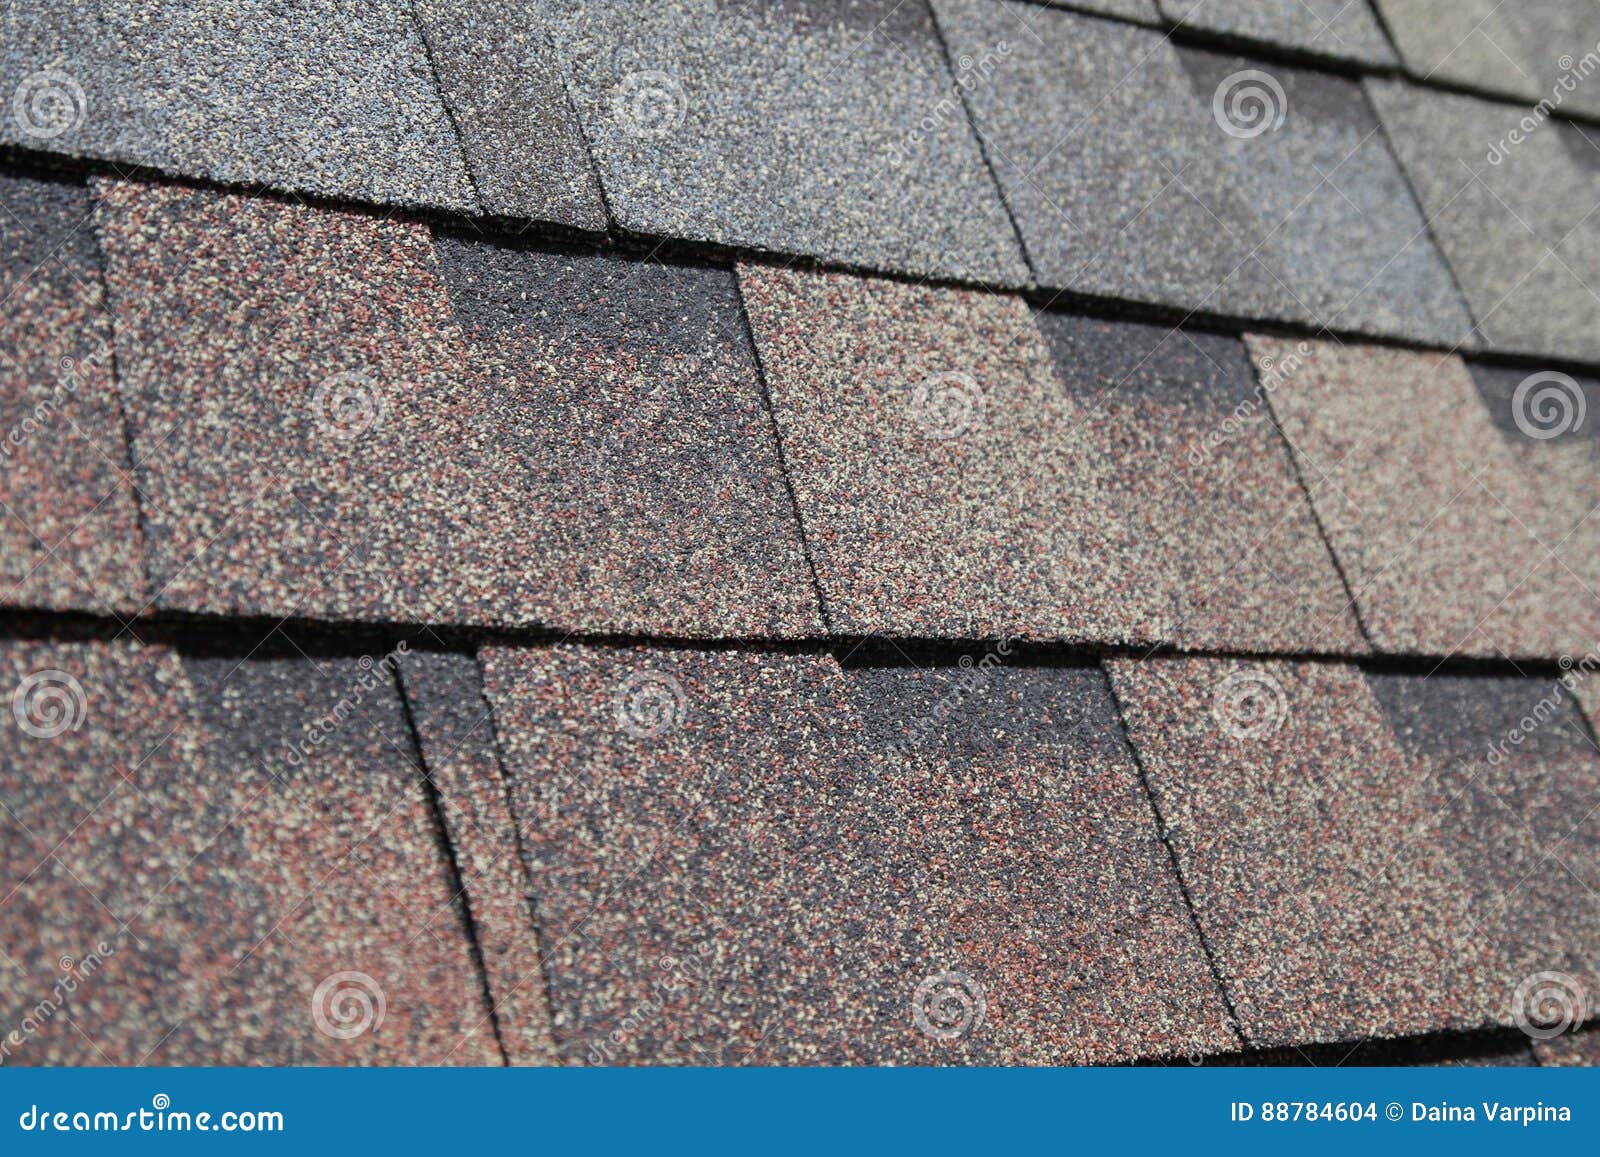 Rubber Roof Tiles Stock Photo Image Of Building